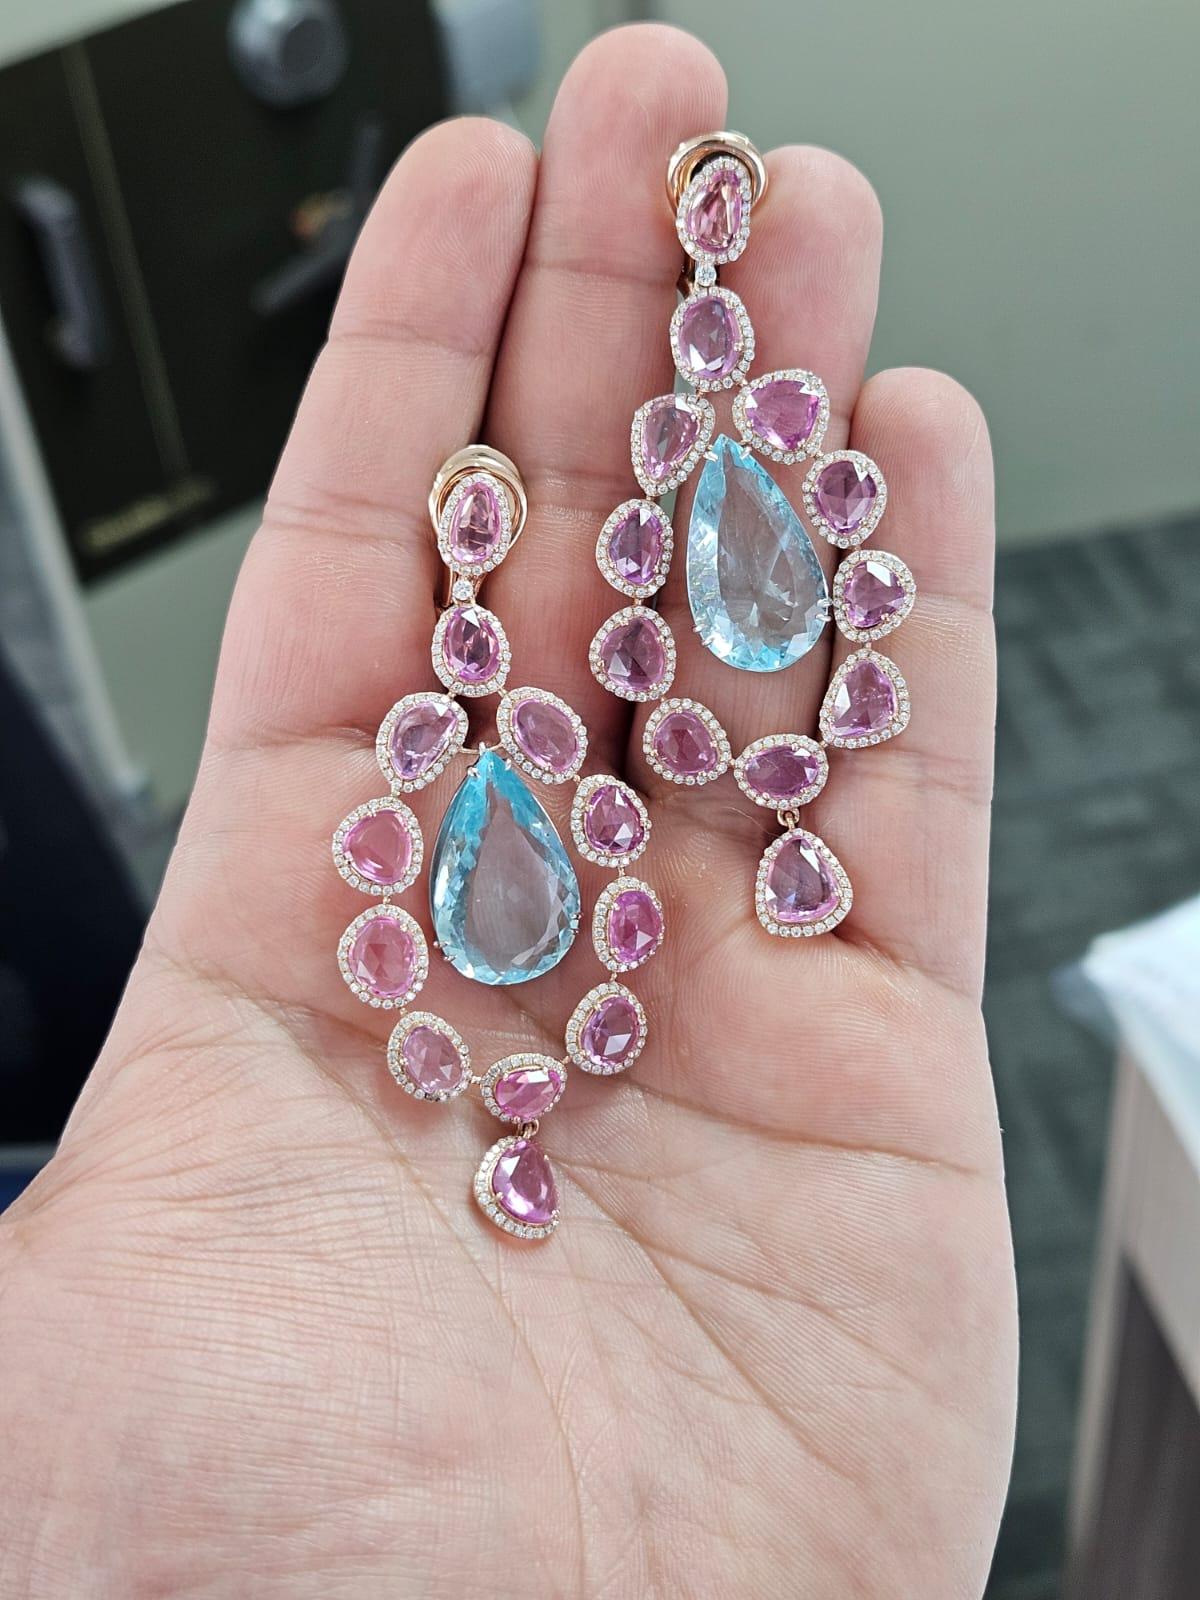 A very beautiful and one of a kind, Aquamarine & Pink Sapphires Chandelier Earrings set in 18K Rose Gold & Diamonds. The weight of the pear shaped Aquamarines is 20.39 carats. The weight of the Pink Sapphire Rose Cuts is 15.88 carats. The Pink